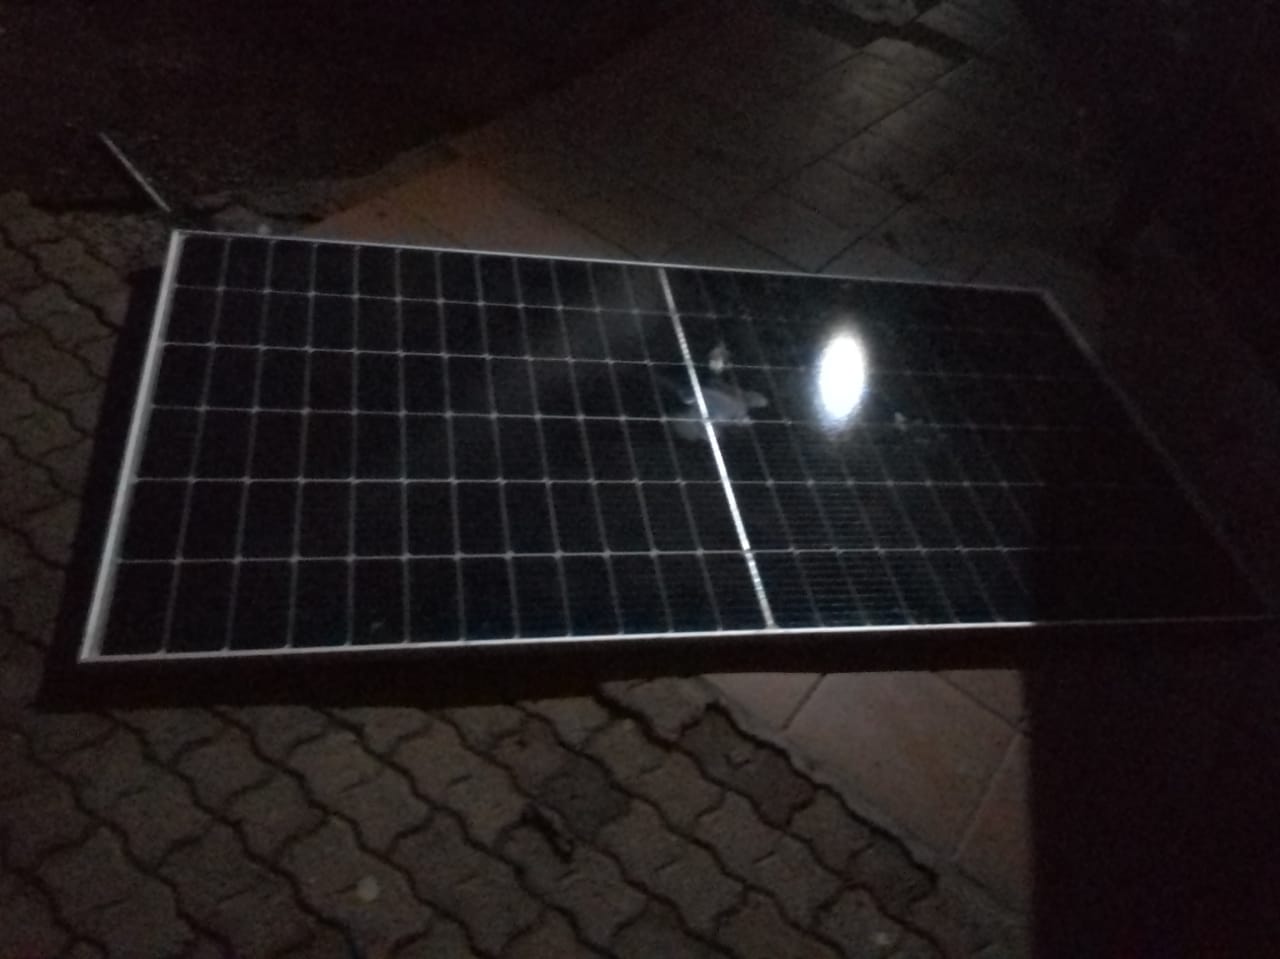 FOUR SUSPECTS NABBED FOR POSSESSION OF SUSPECTED STOLEN SOLAR PANELS VALUED THOUSANDS OF RANDS